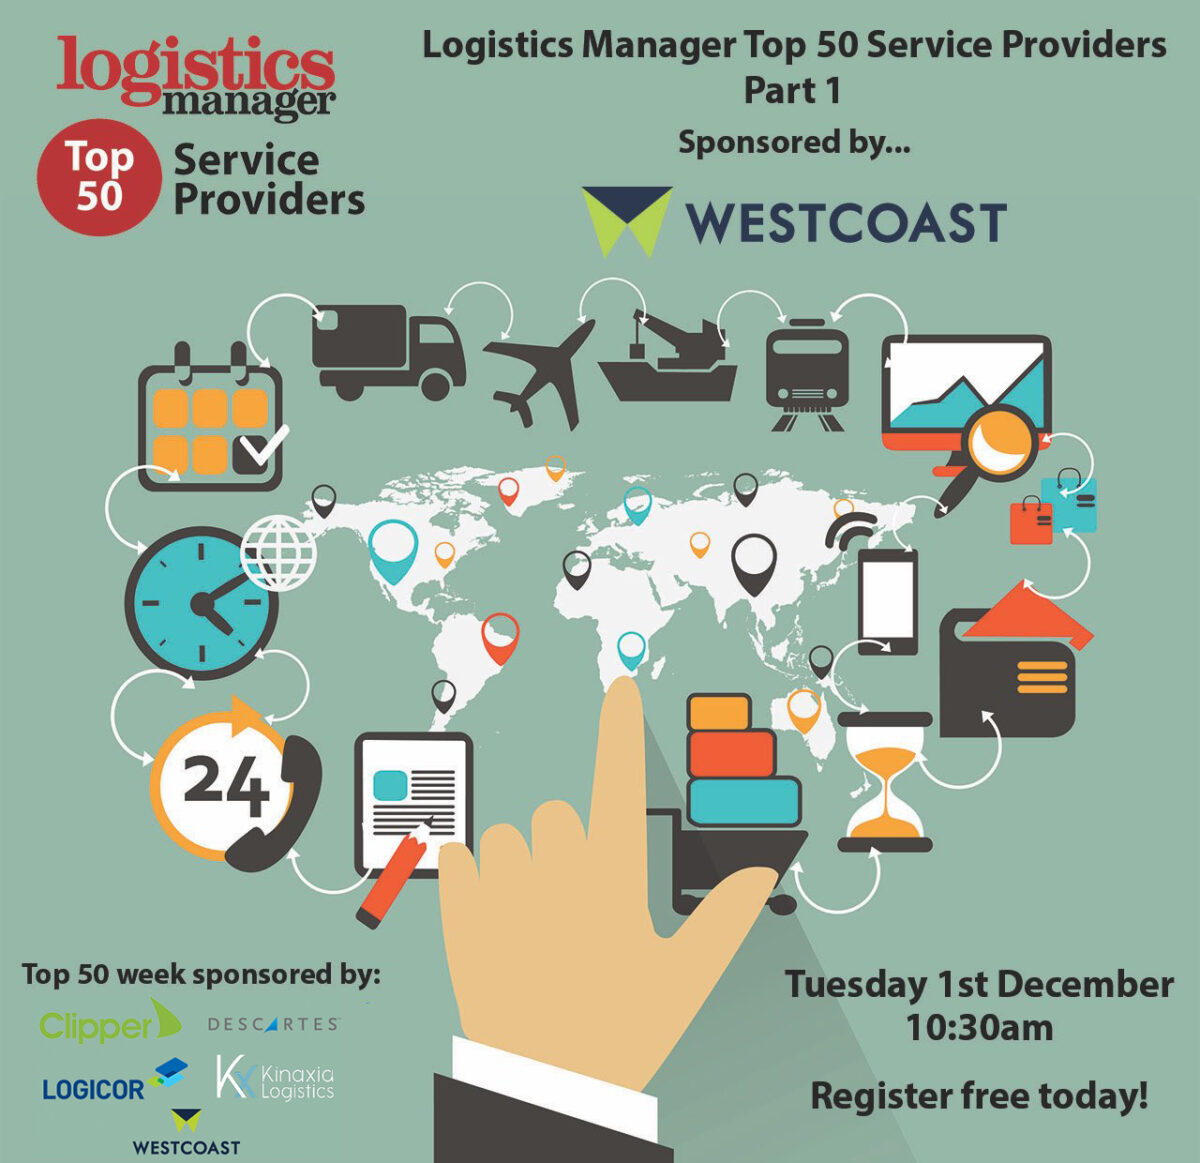 Logistics Manager Top 50 Service Providers Part One, in association with Westcoast